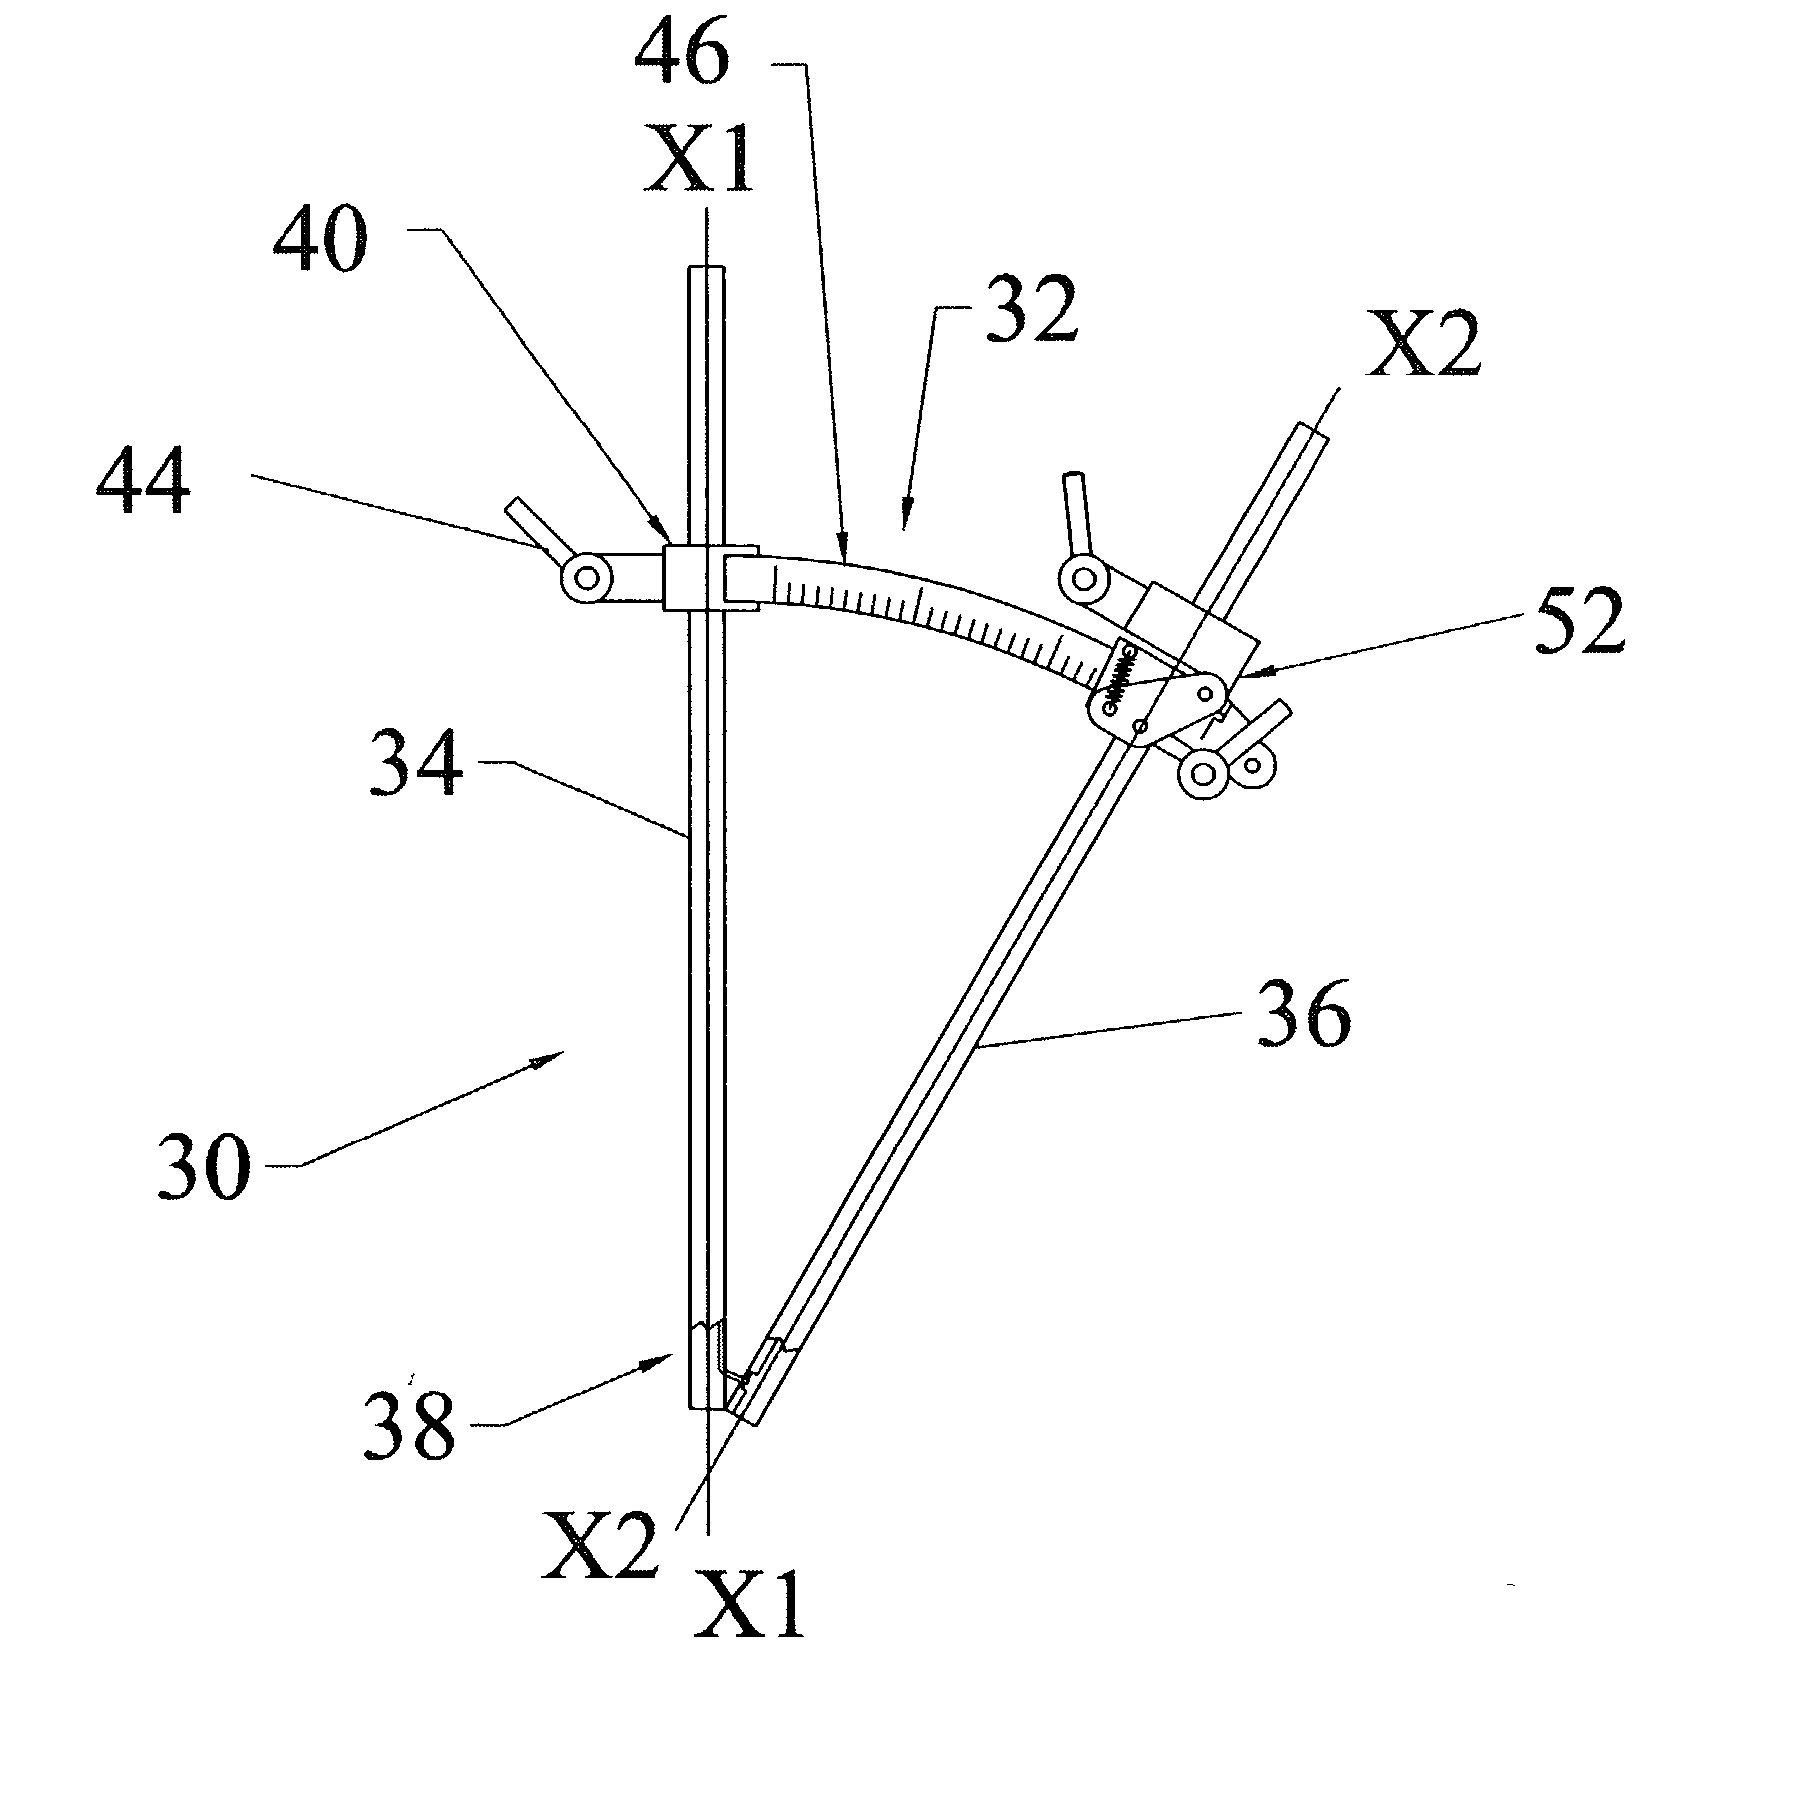 Multiportal device and method for percutaneous surgery